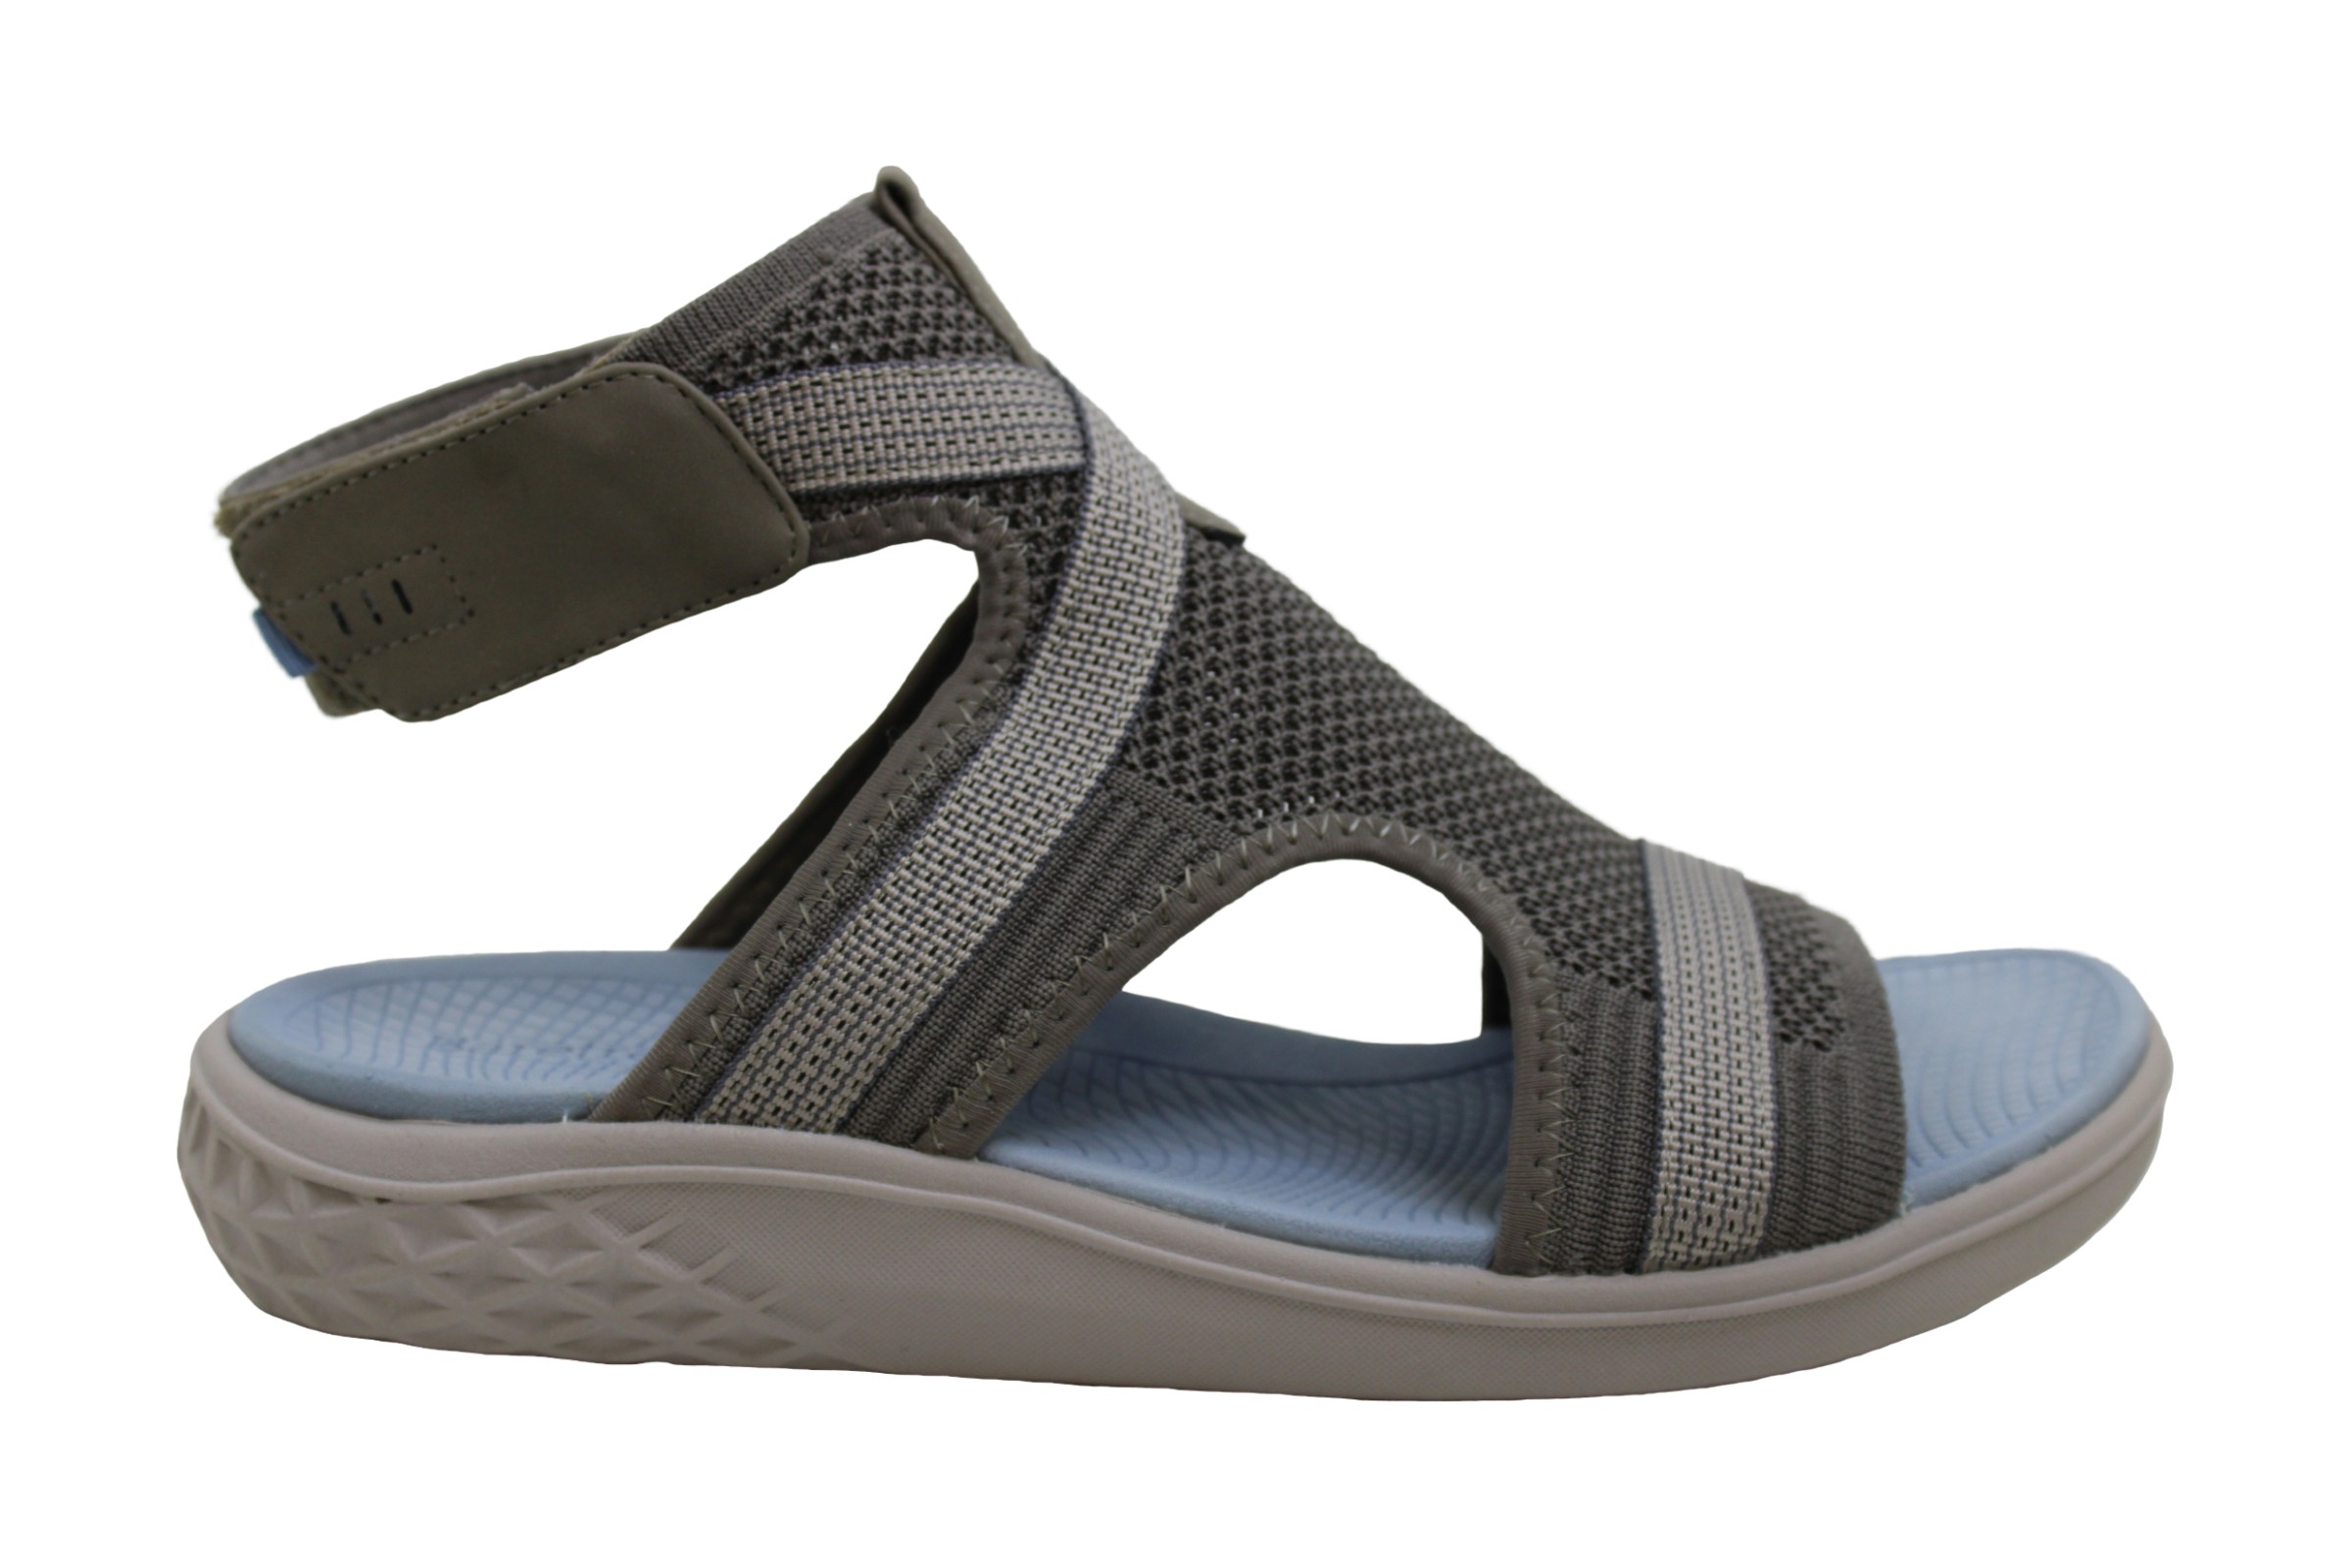 Bare Traps Womens Flat Sandals in Grey Color, Size 8 WBH | eBay